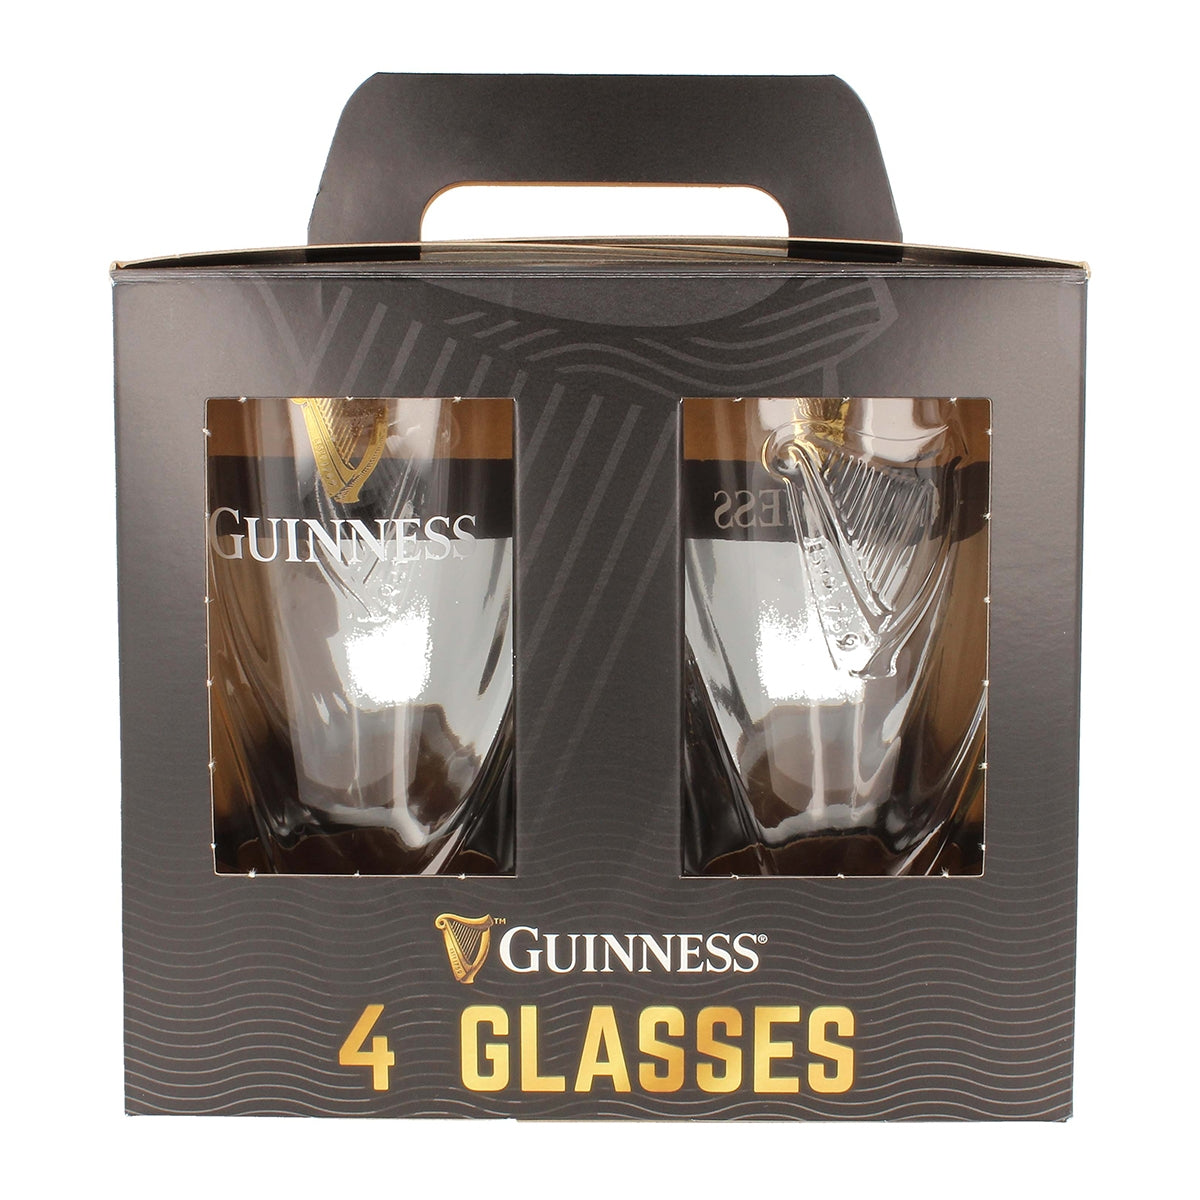 Guinness Pint Glass 4 Pack: the ultimate gift.